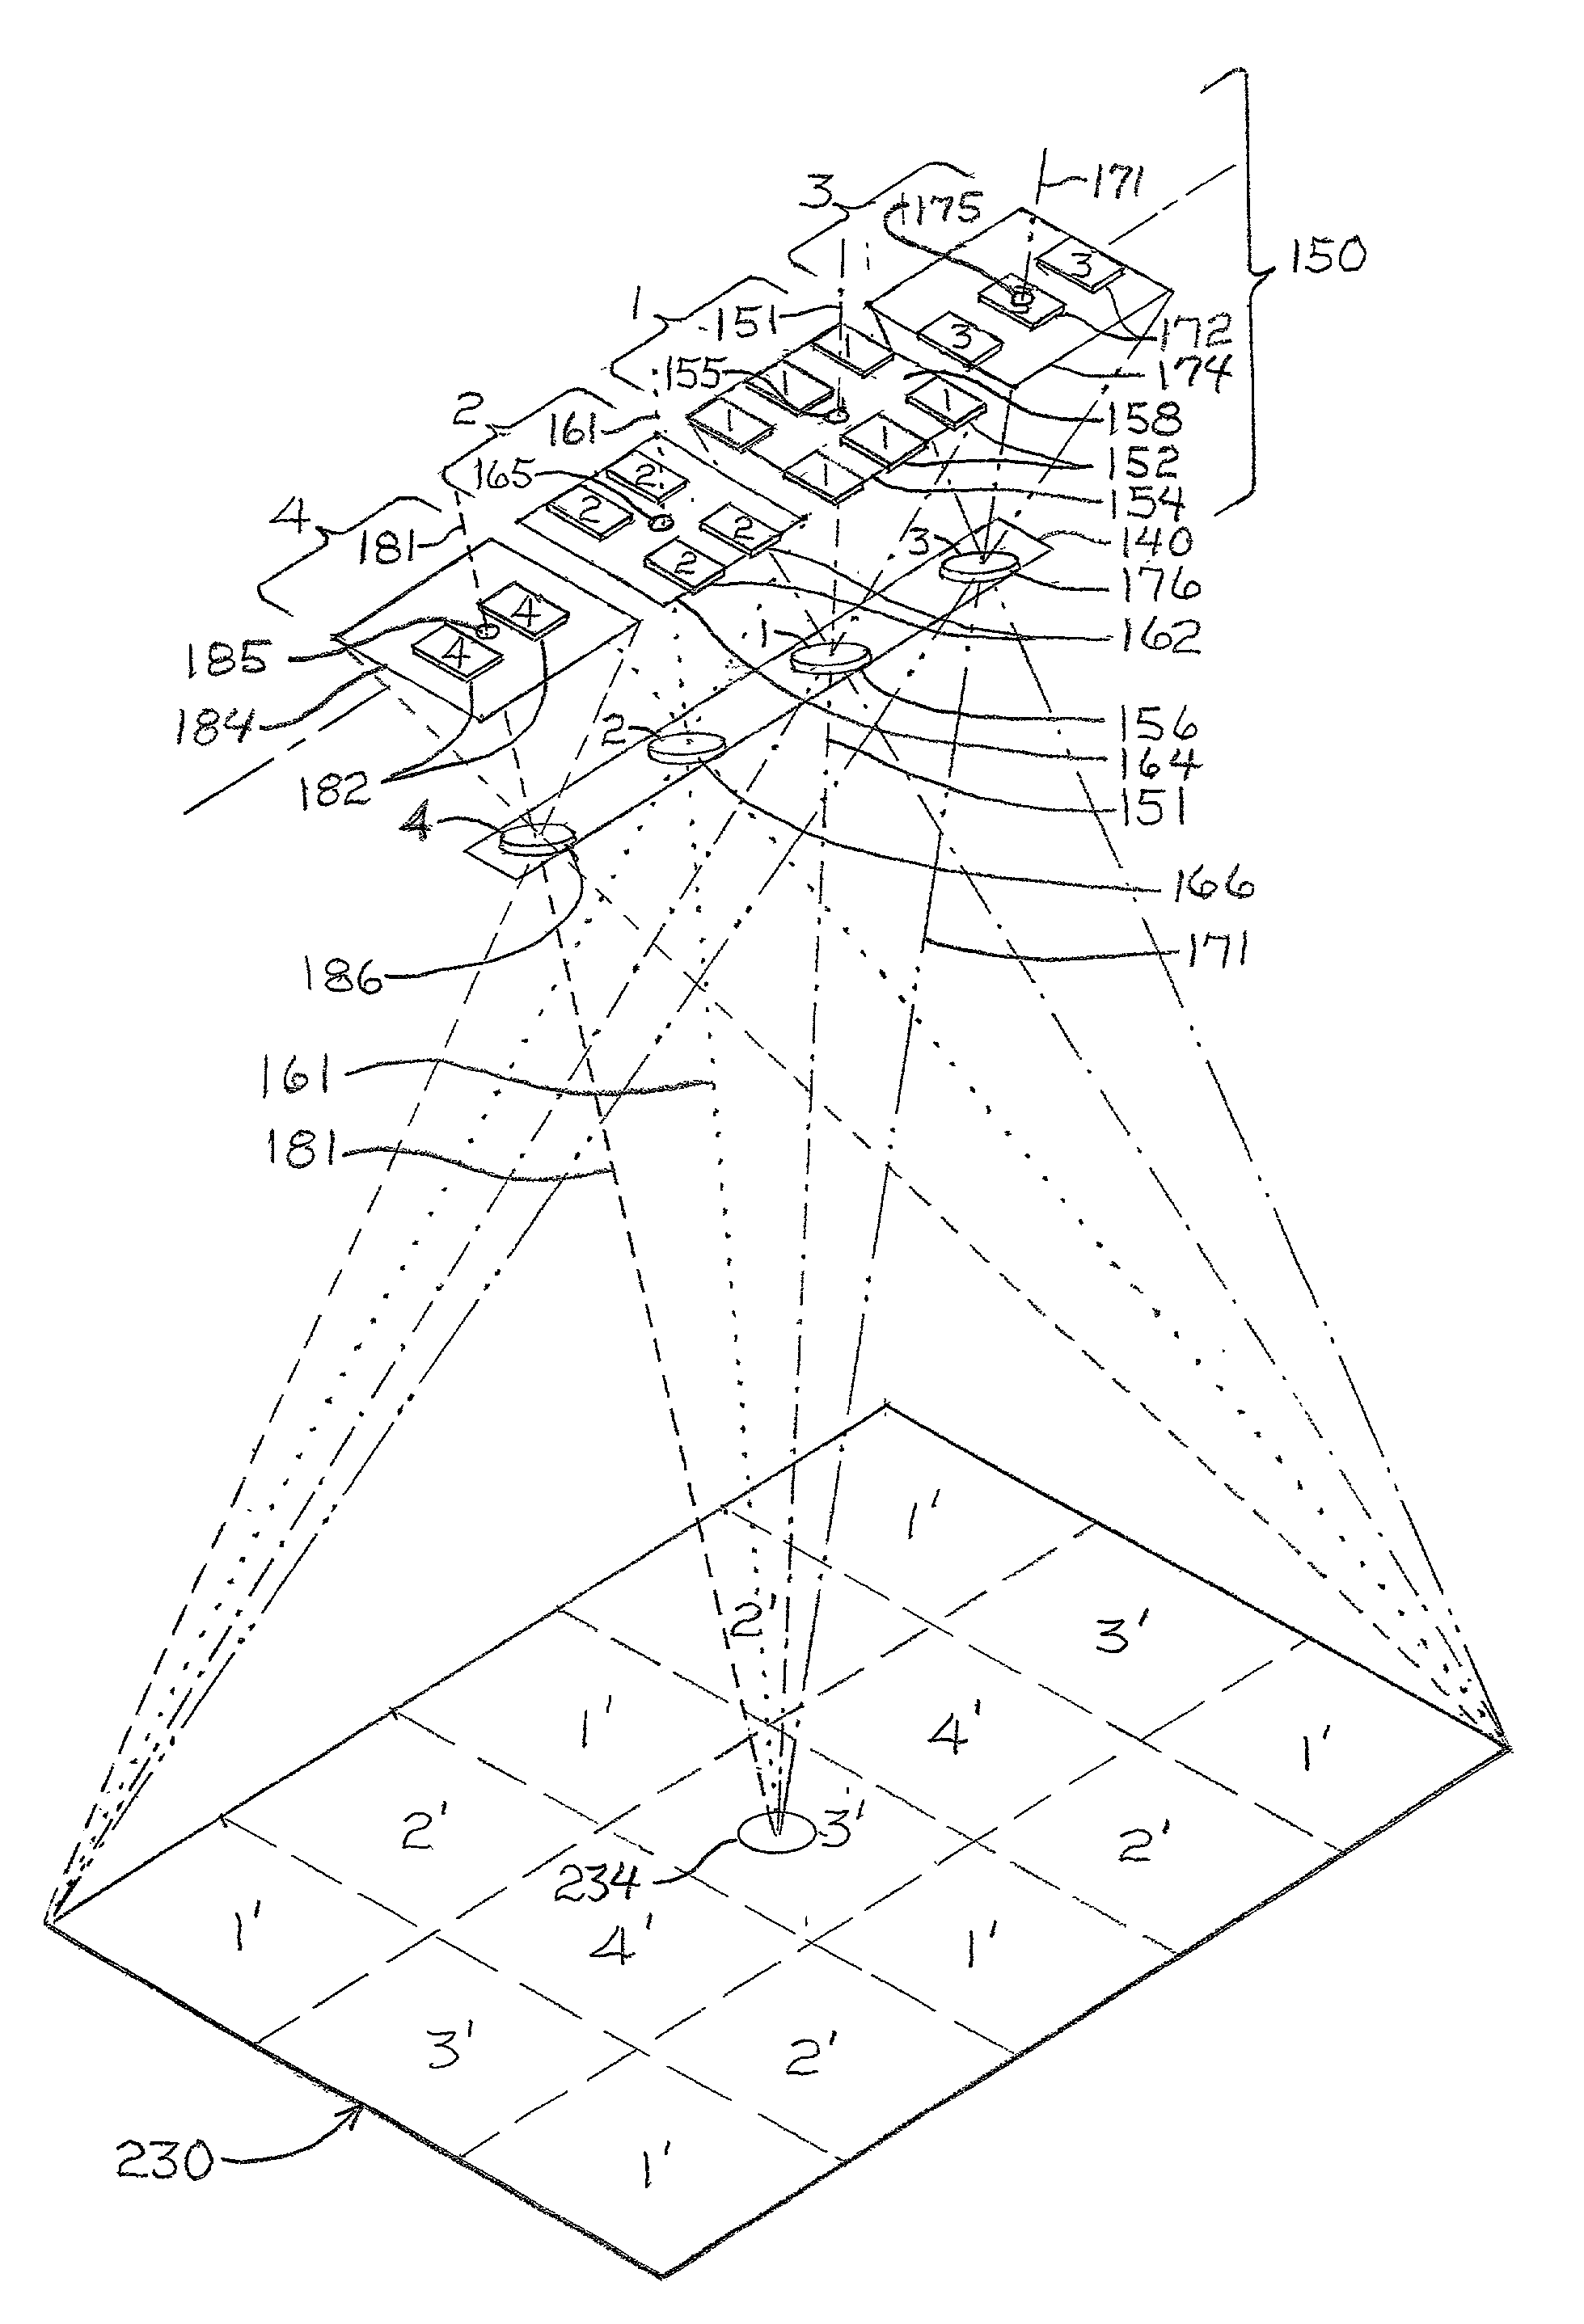 Self-calibrating, digital, large format camera with single or multiple detector arrays and single or multiple optical systems